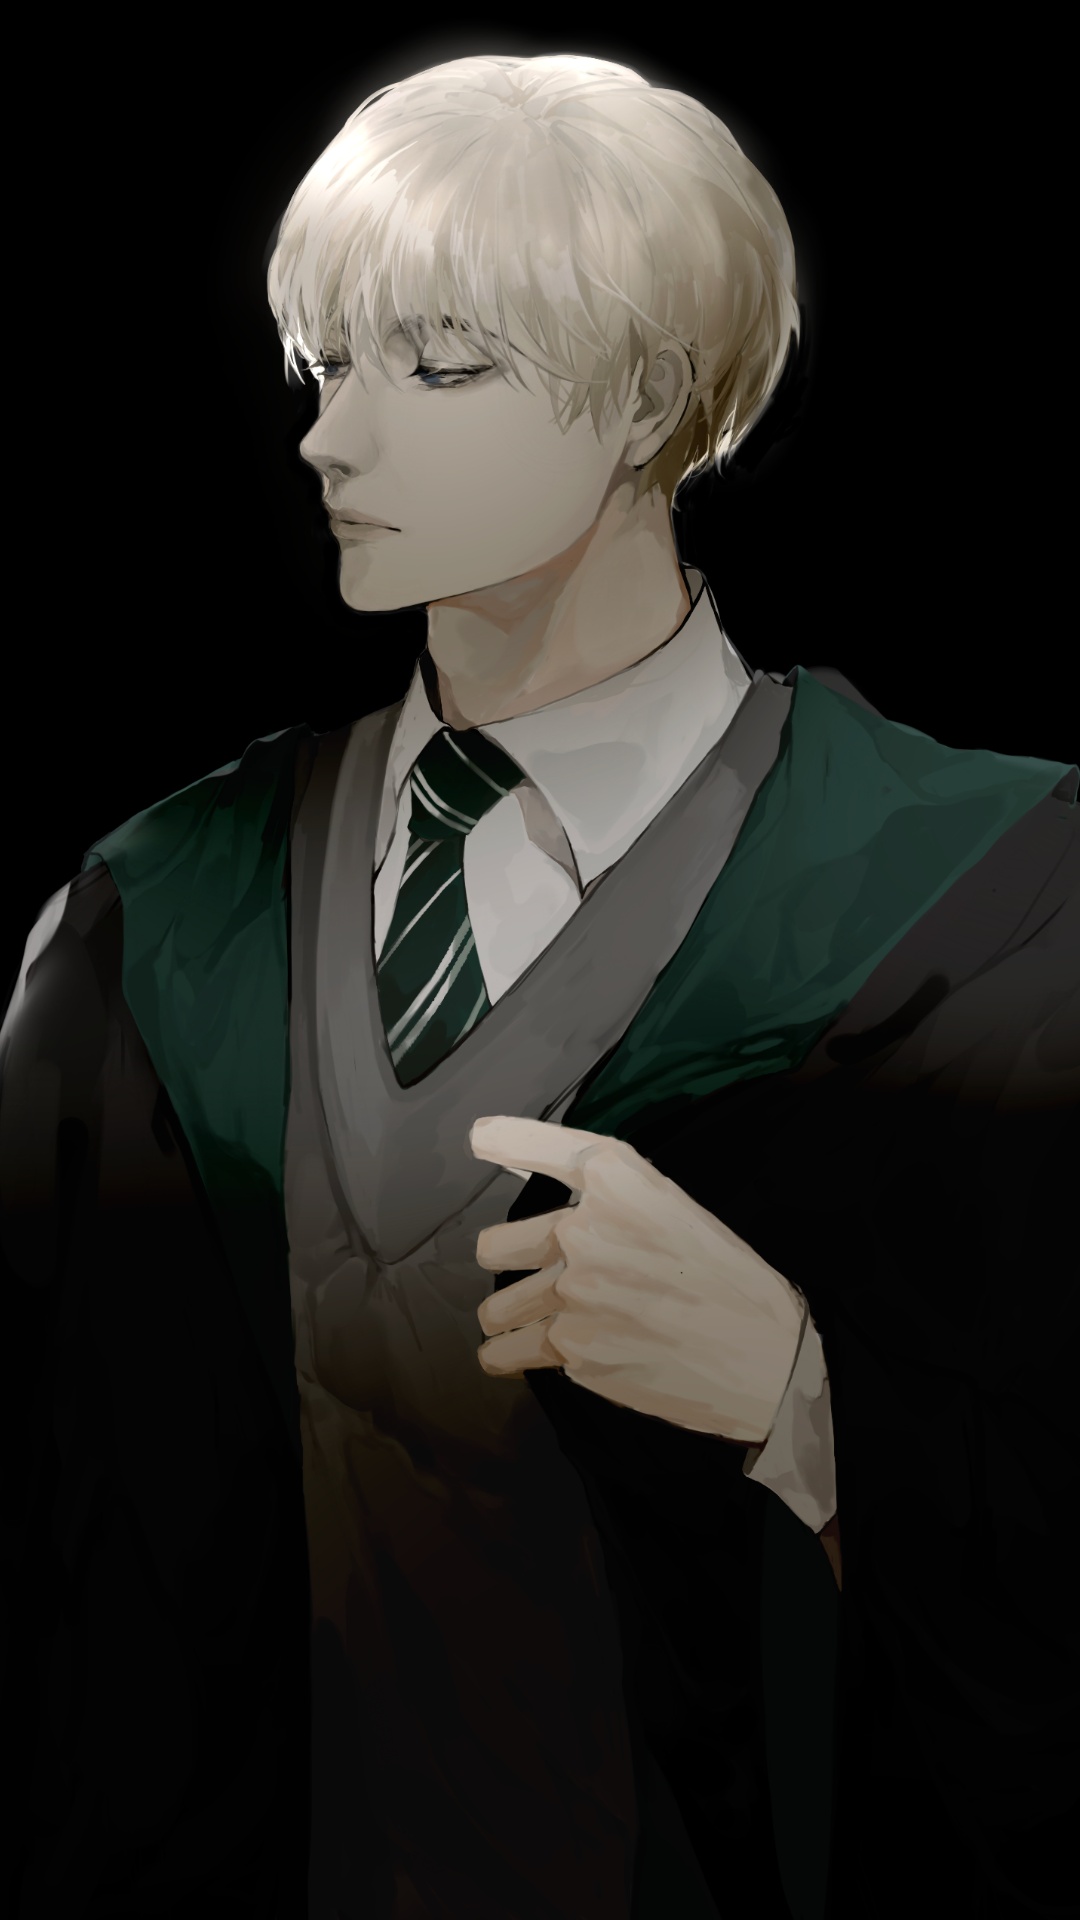 HD Draco Malfoy Wallpaper For Mobile